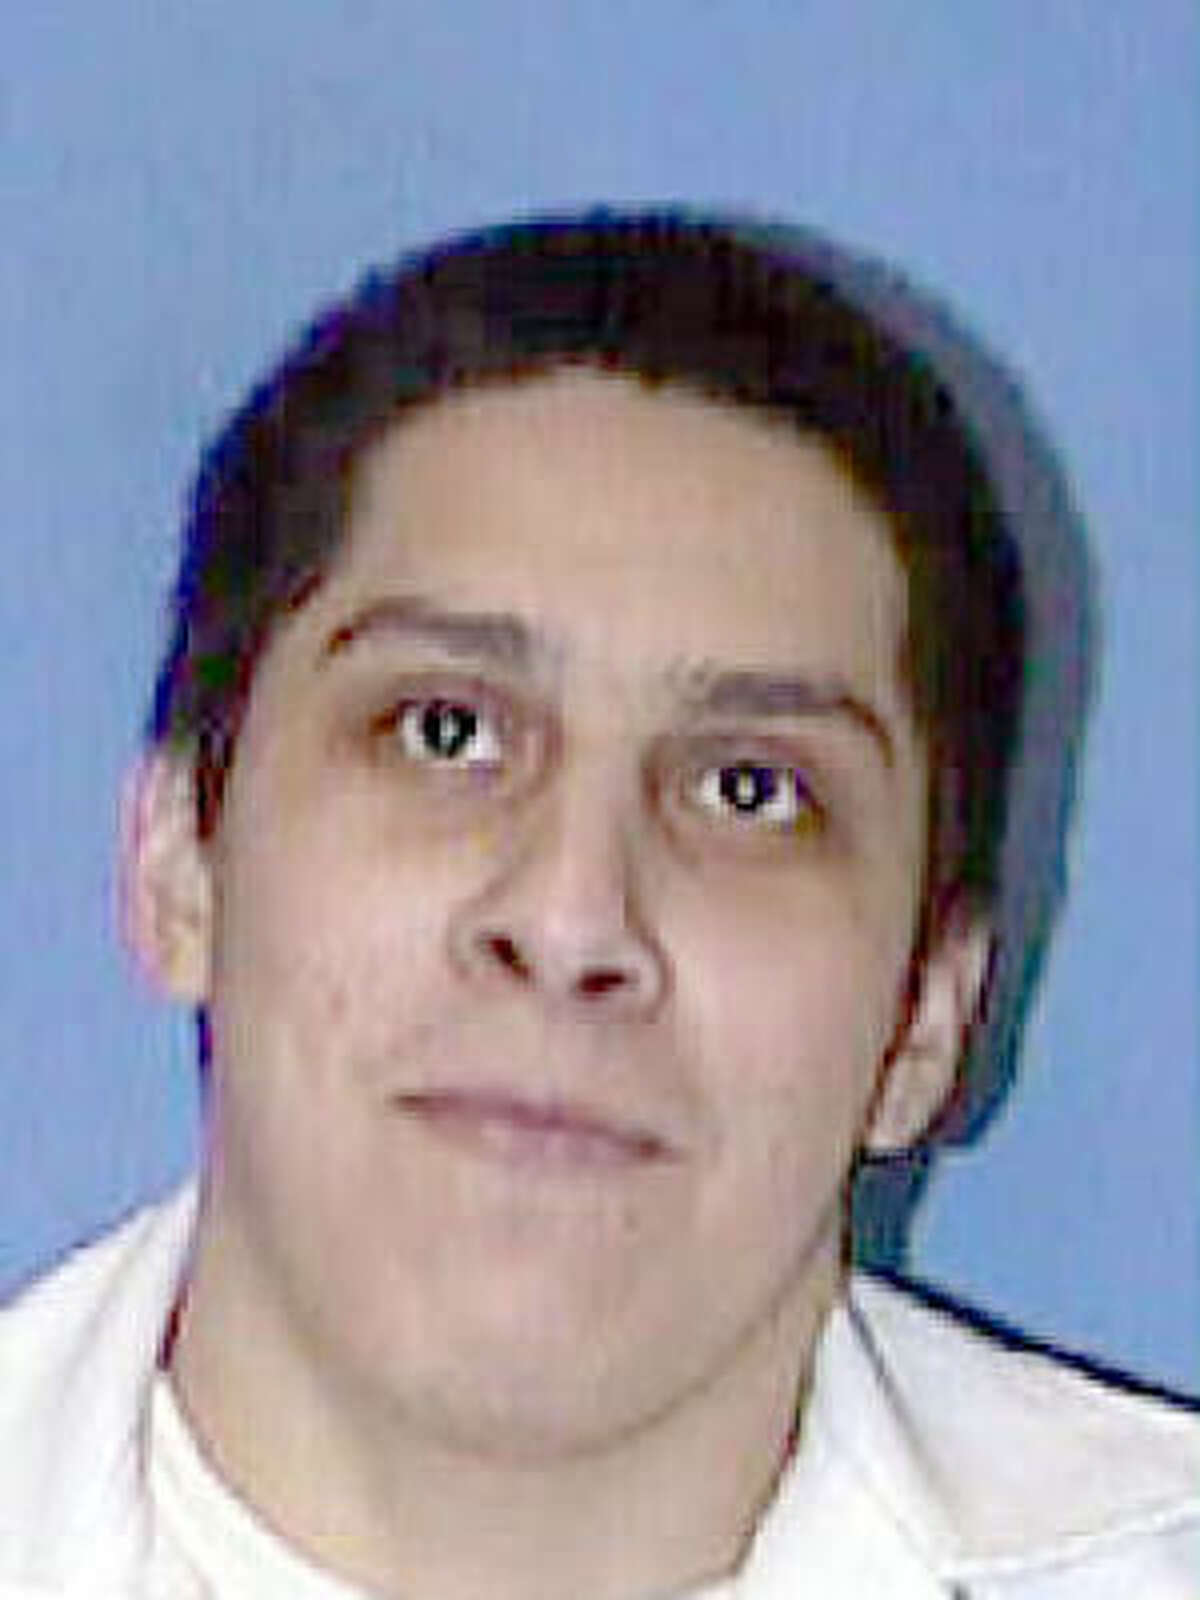 A Houston judge has set Aug. 5 as the execution date for Jose Medellin, who was sentenced to death for the 1993 gang murders of two teenage girls in a Houston park.